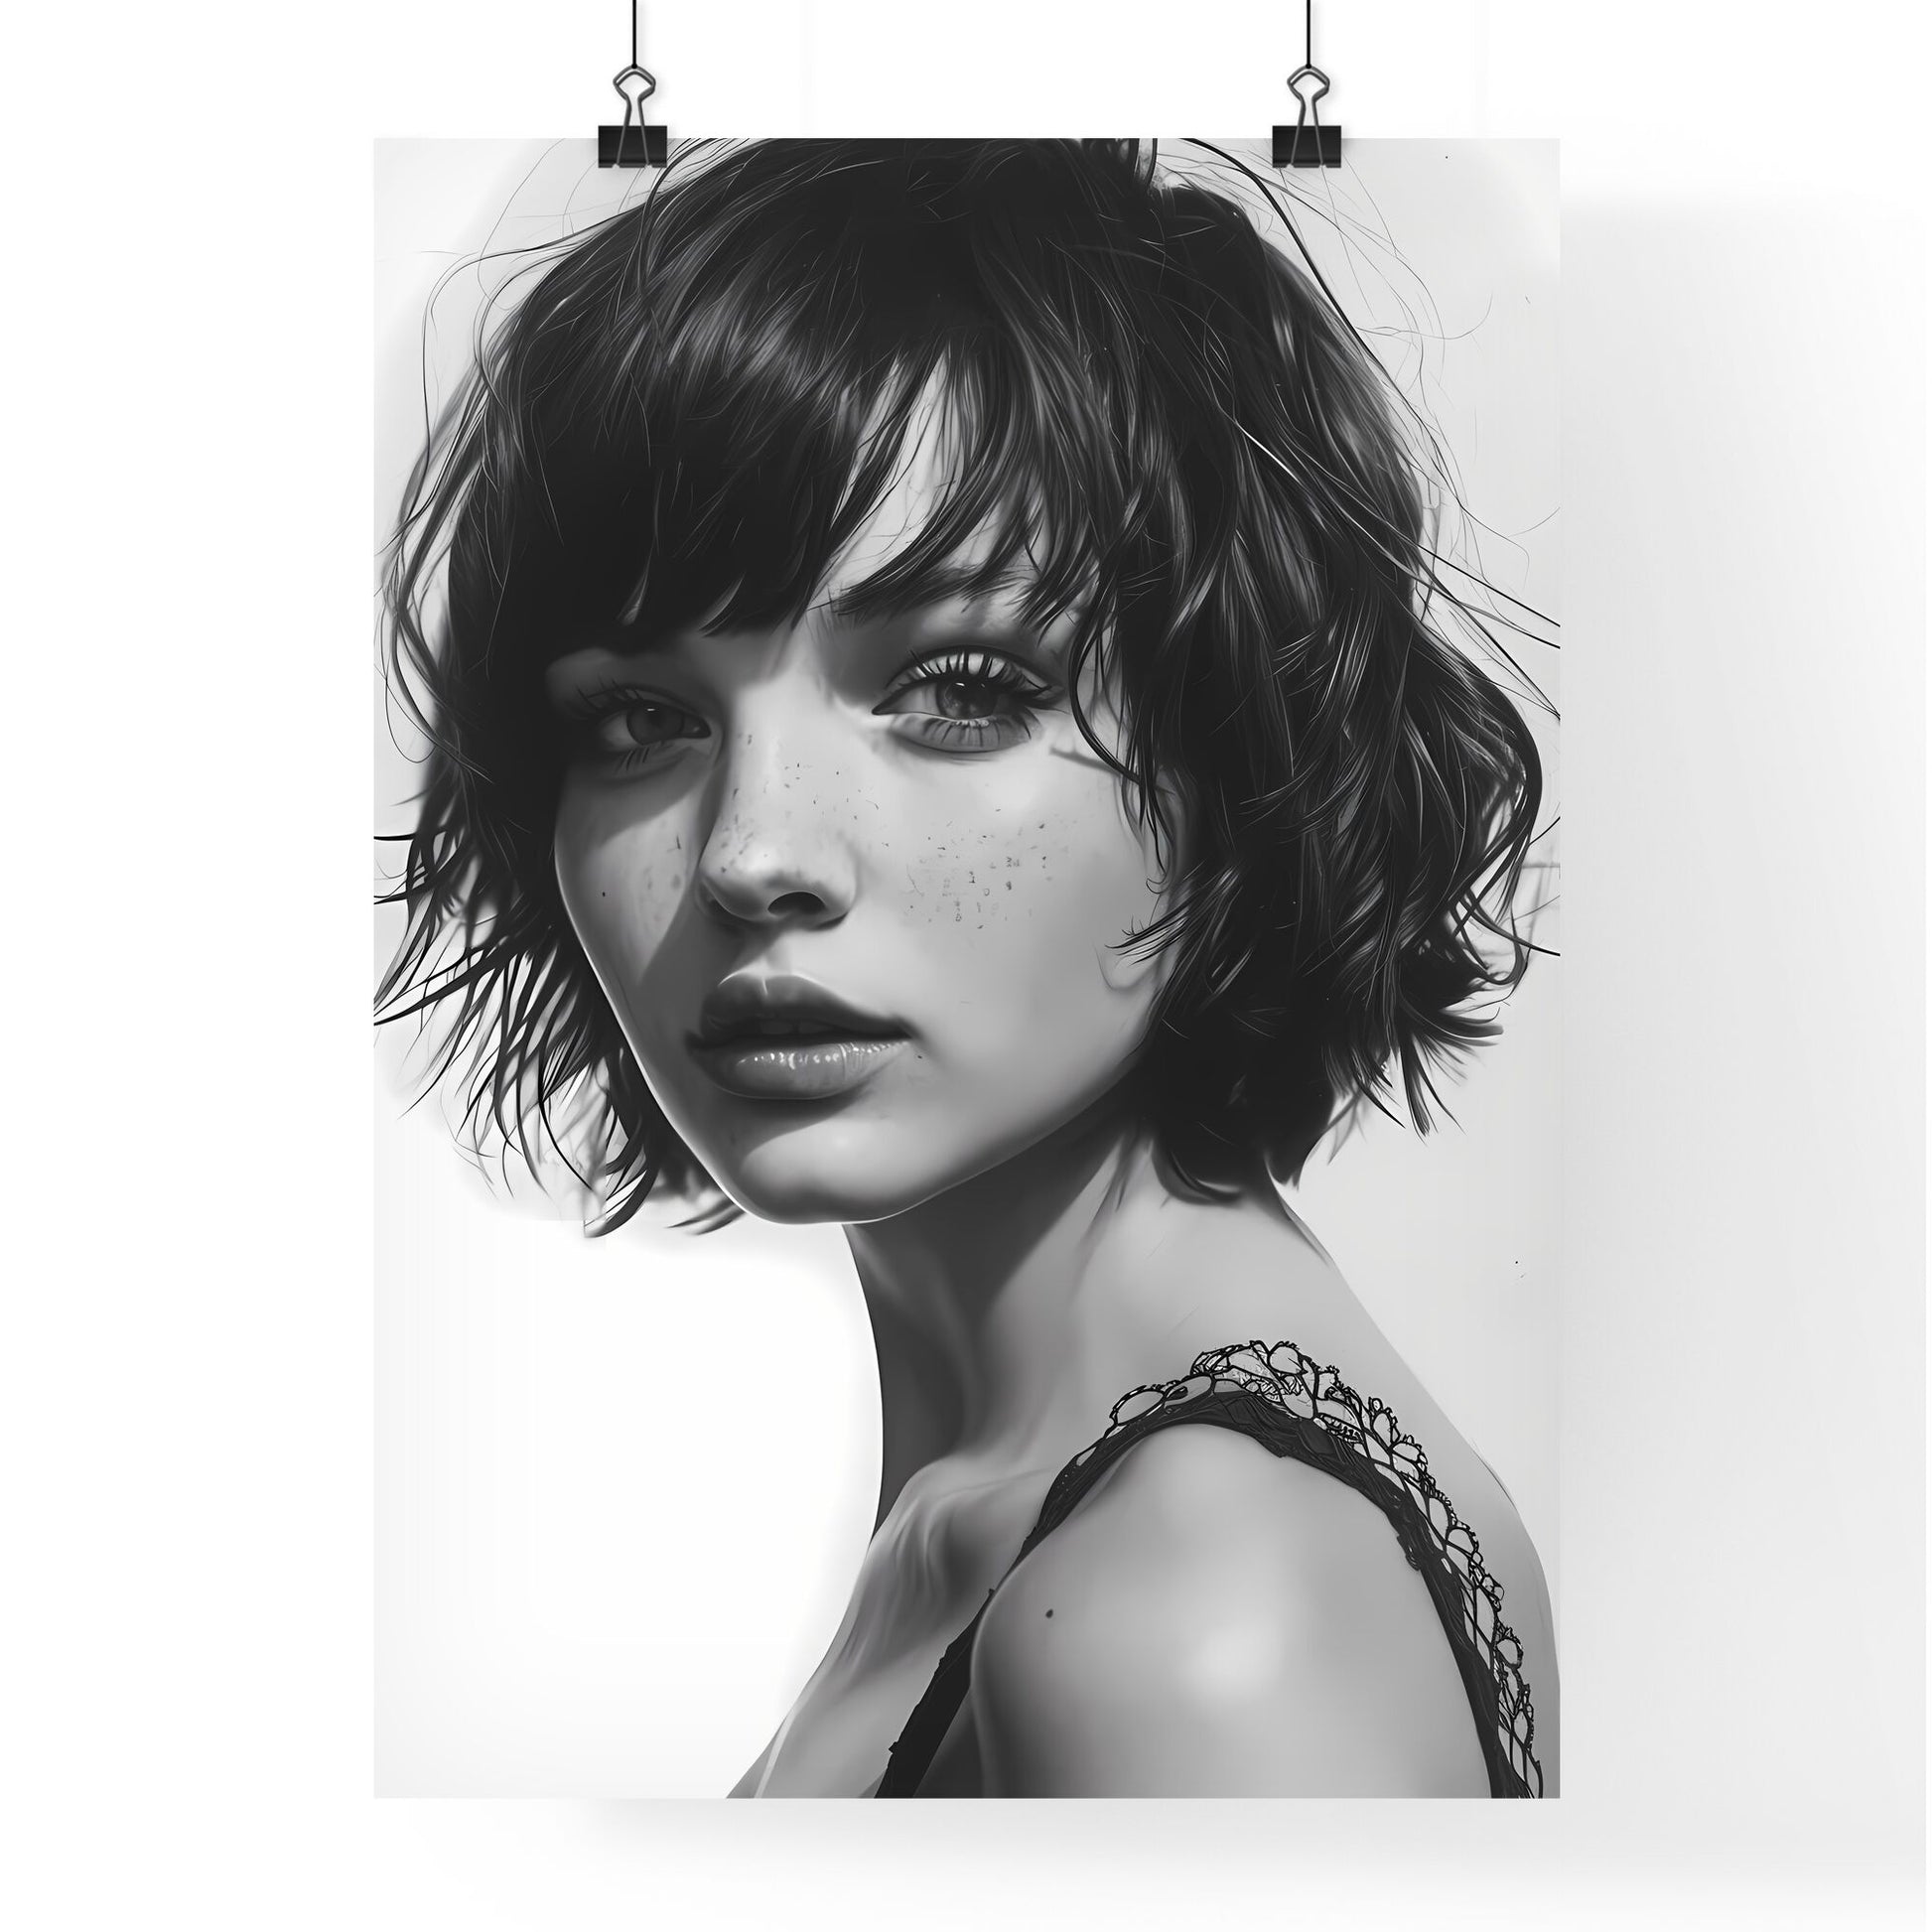 A Poster of ink drawing - A Woman With Short Hair And Freckles Default Title